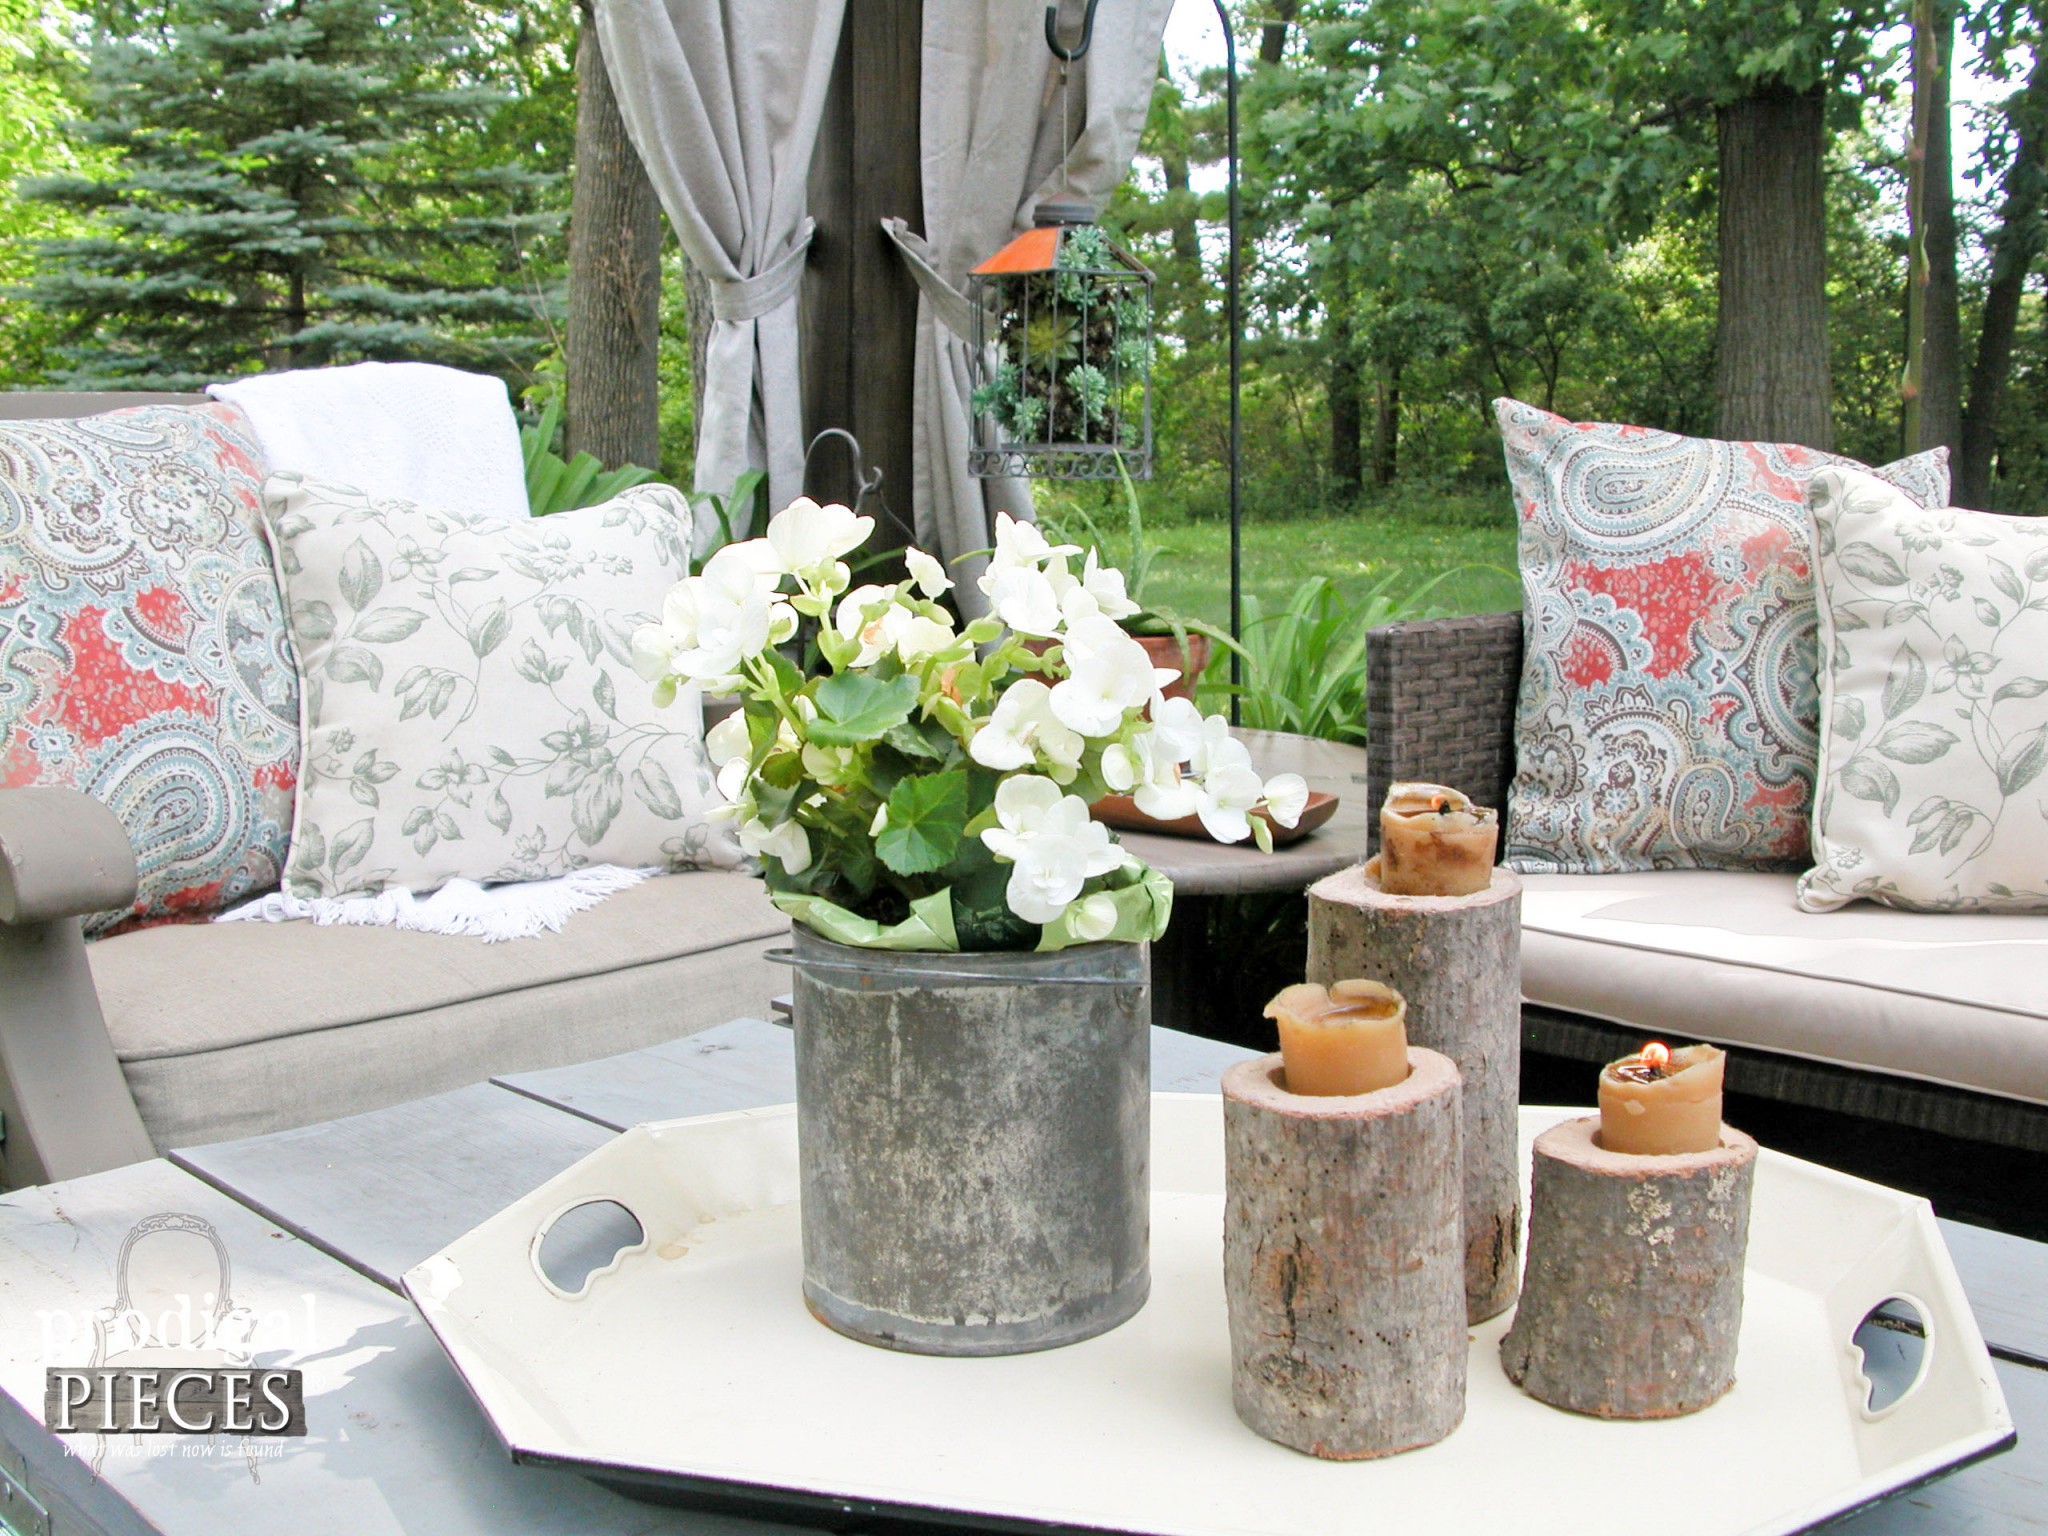 Outdoor Pillows on a Budget by Prodigal Pieces | www.prodigalpieces.com